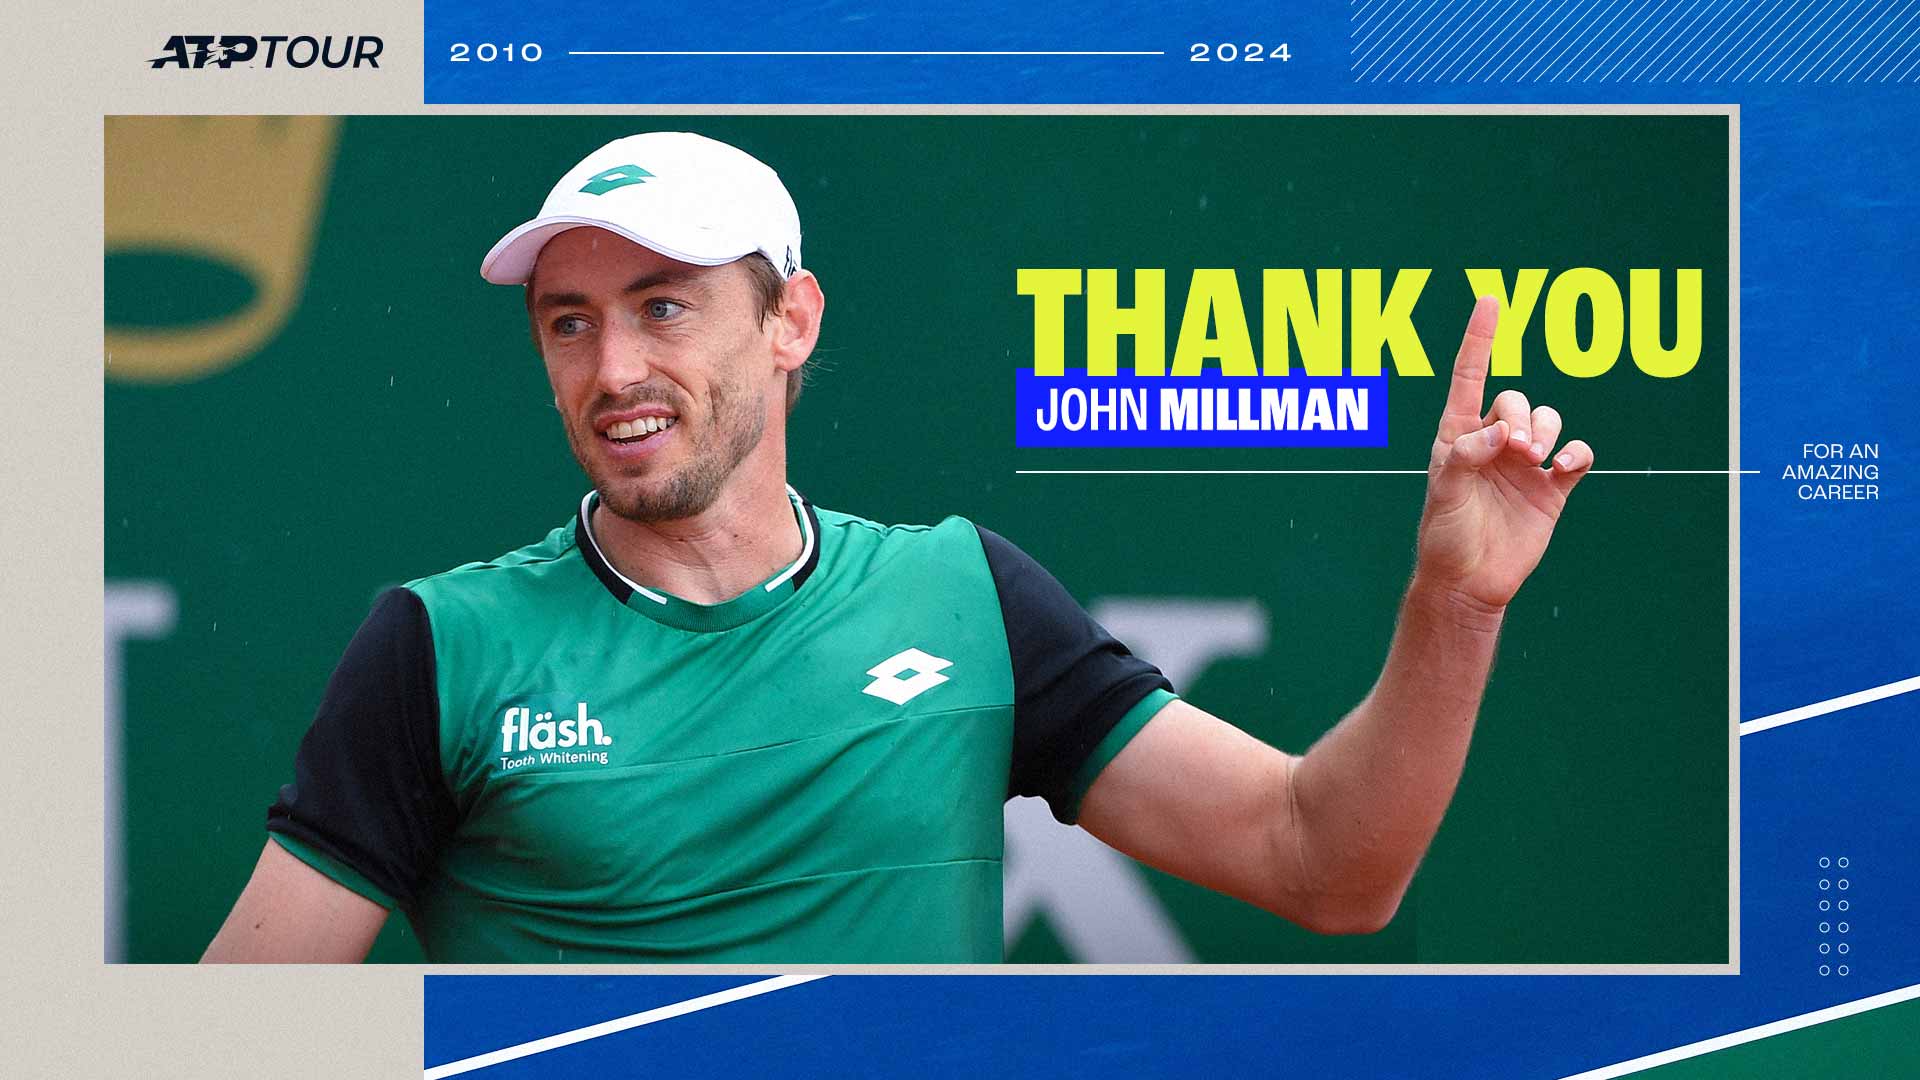 John Millman reached a career-high No. 33 in the Pepperstone ATP Rankings.